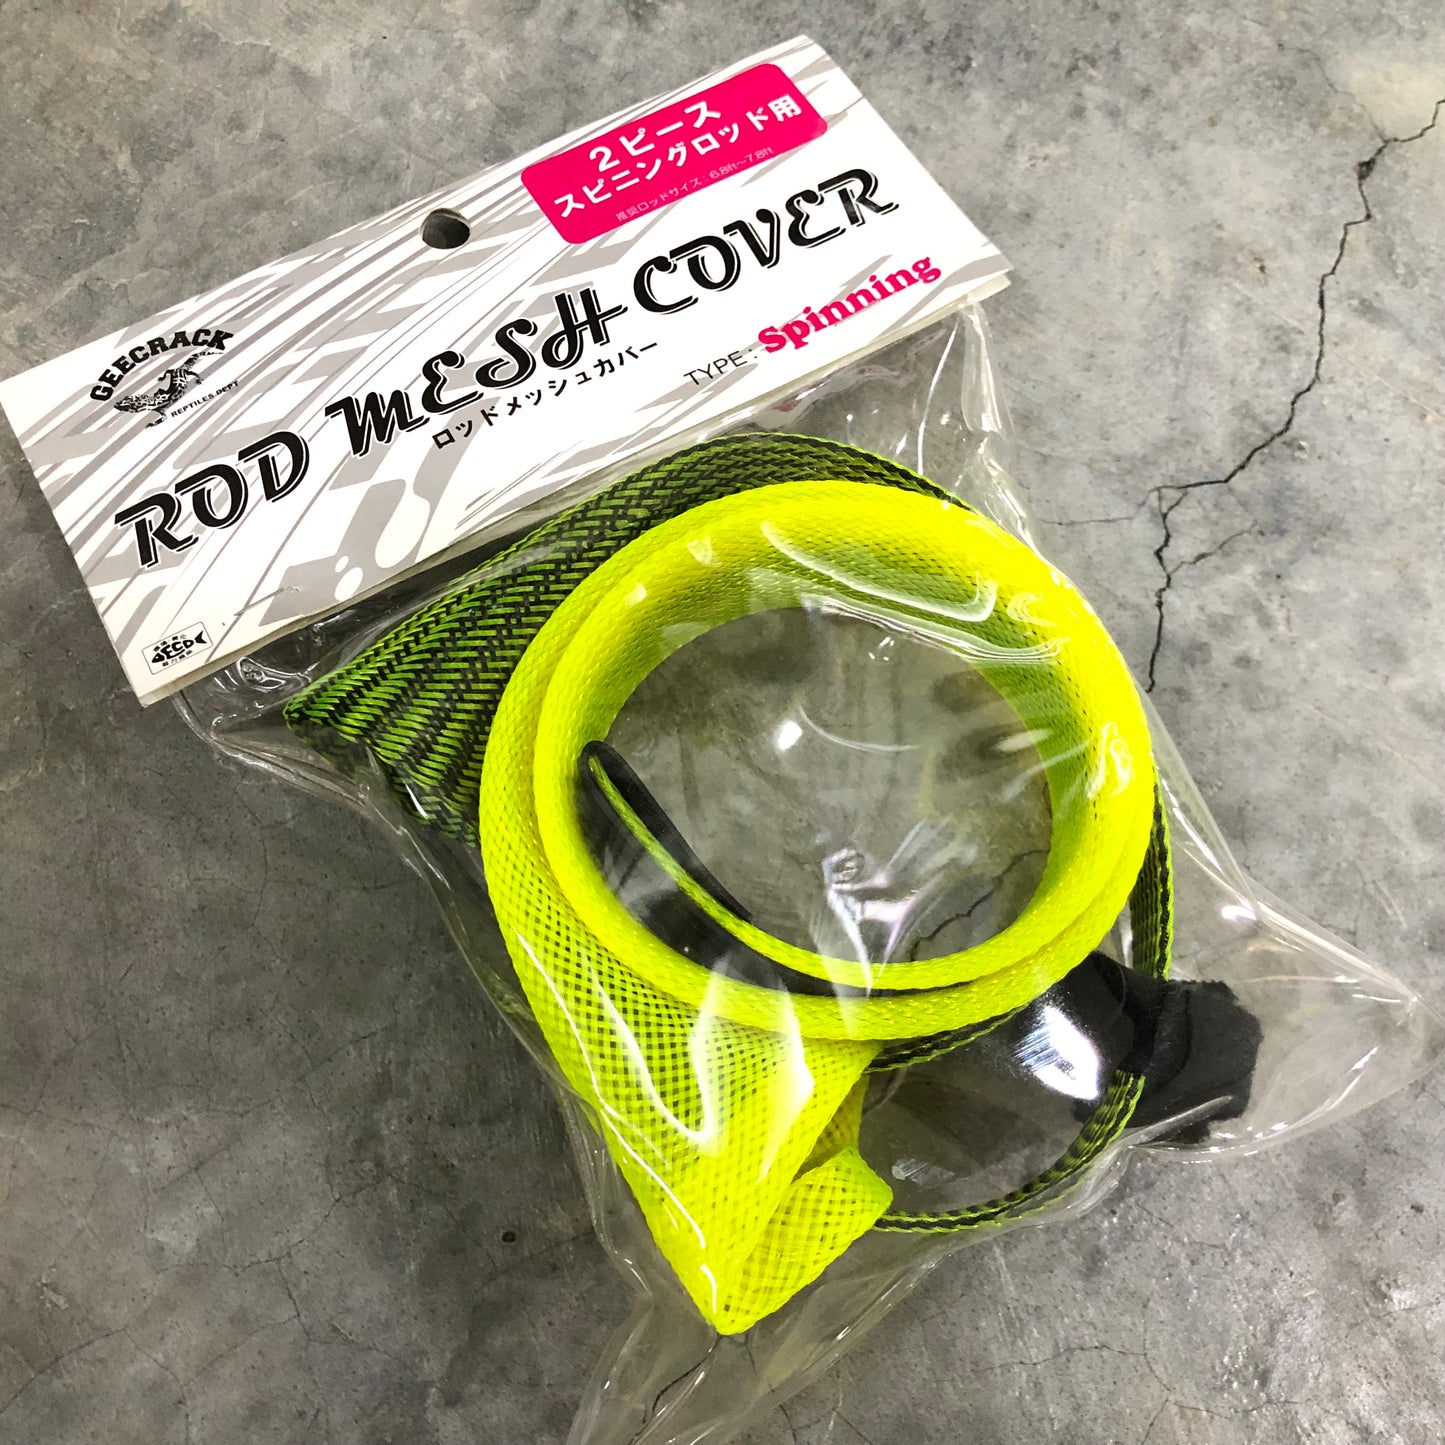 Rod Mesh Cover